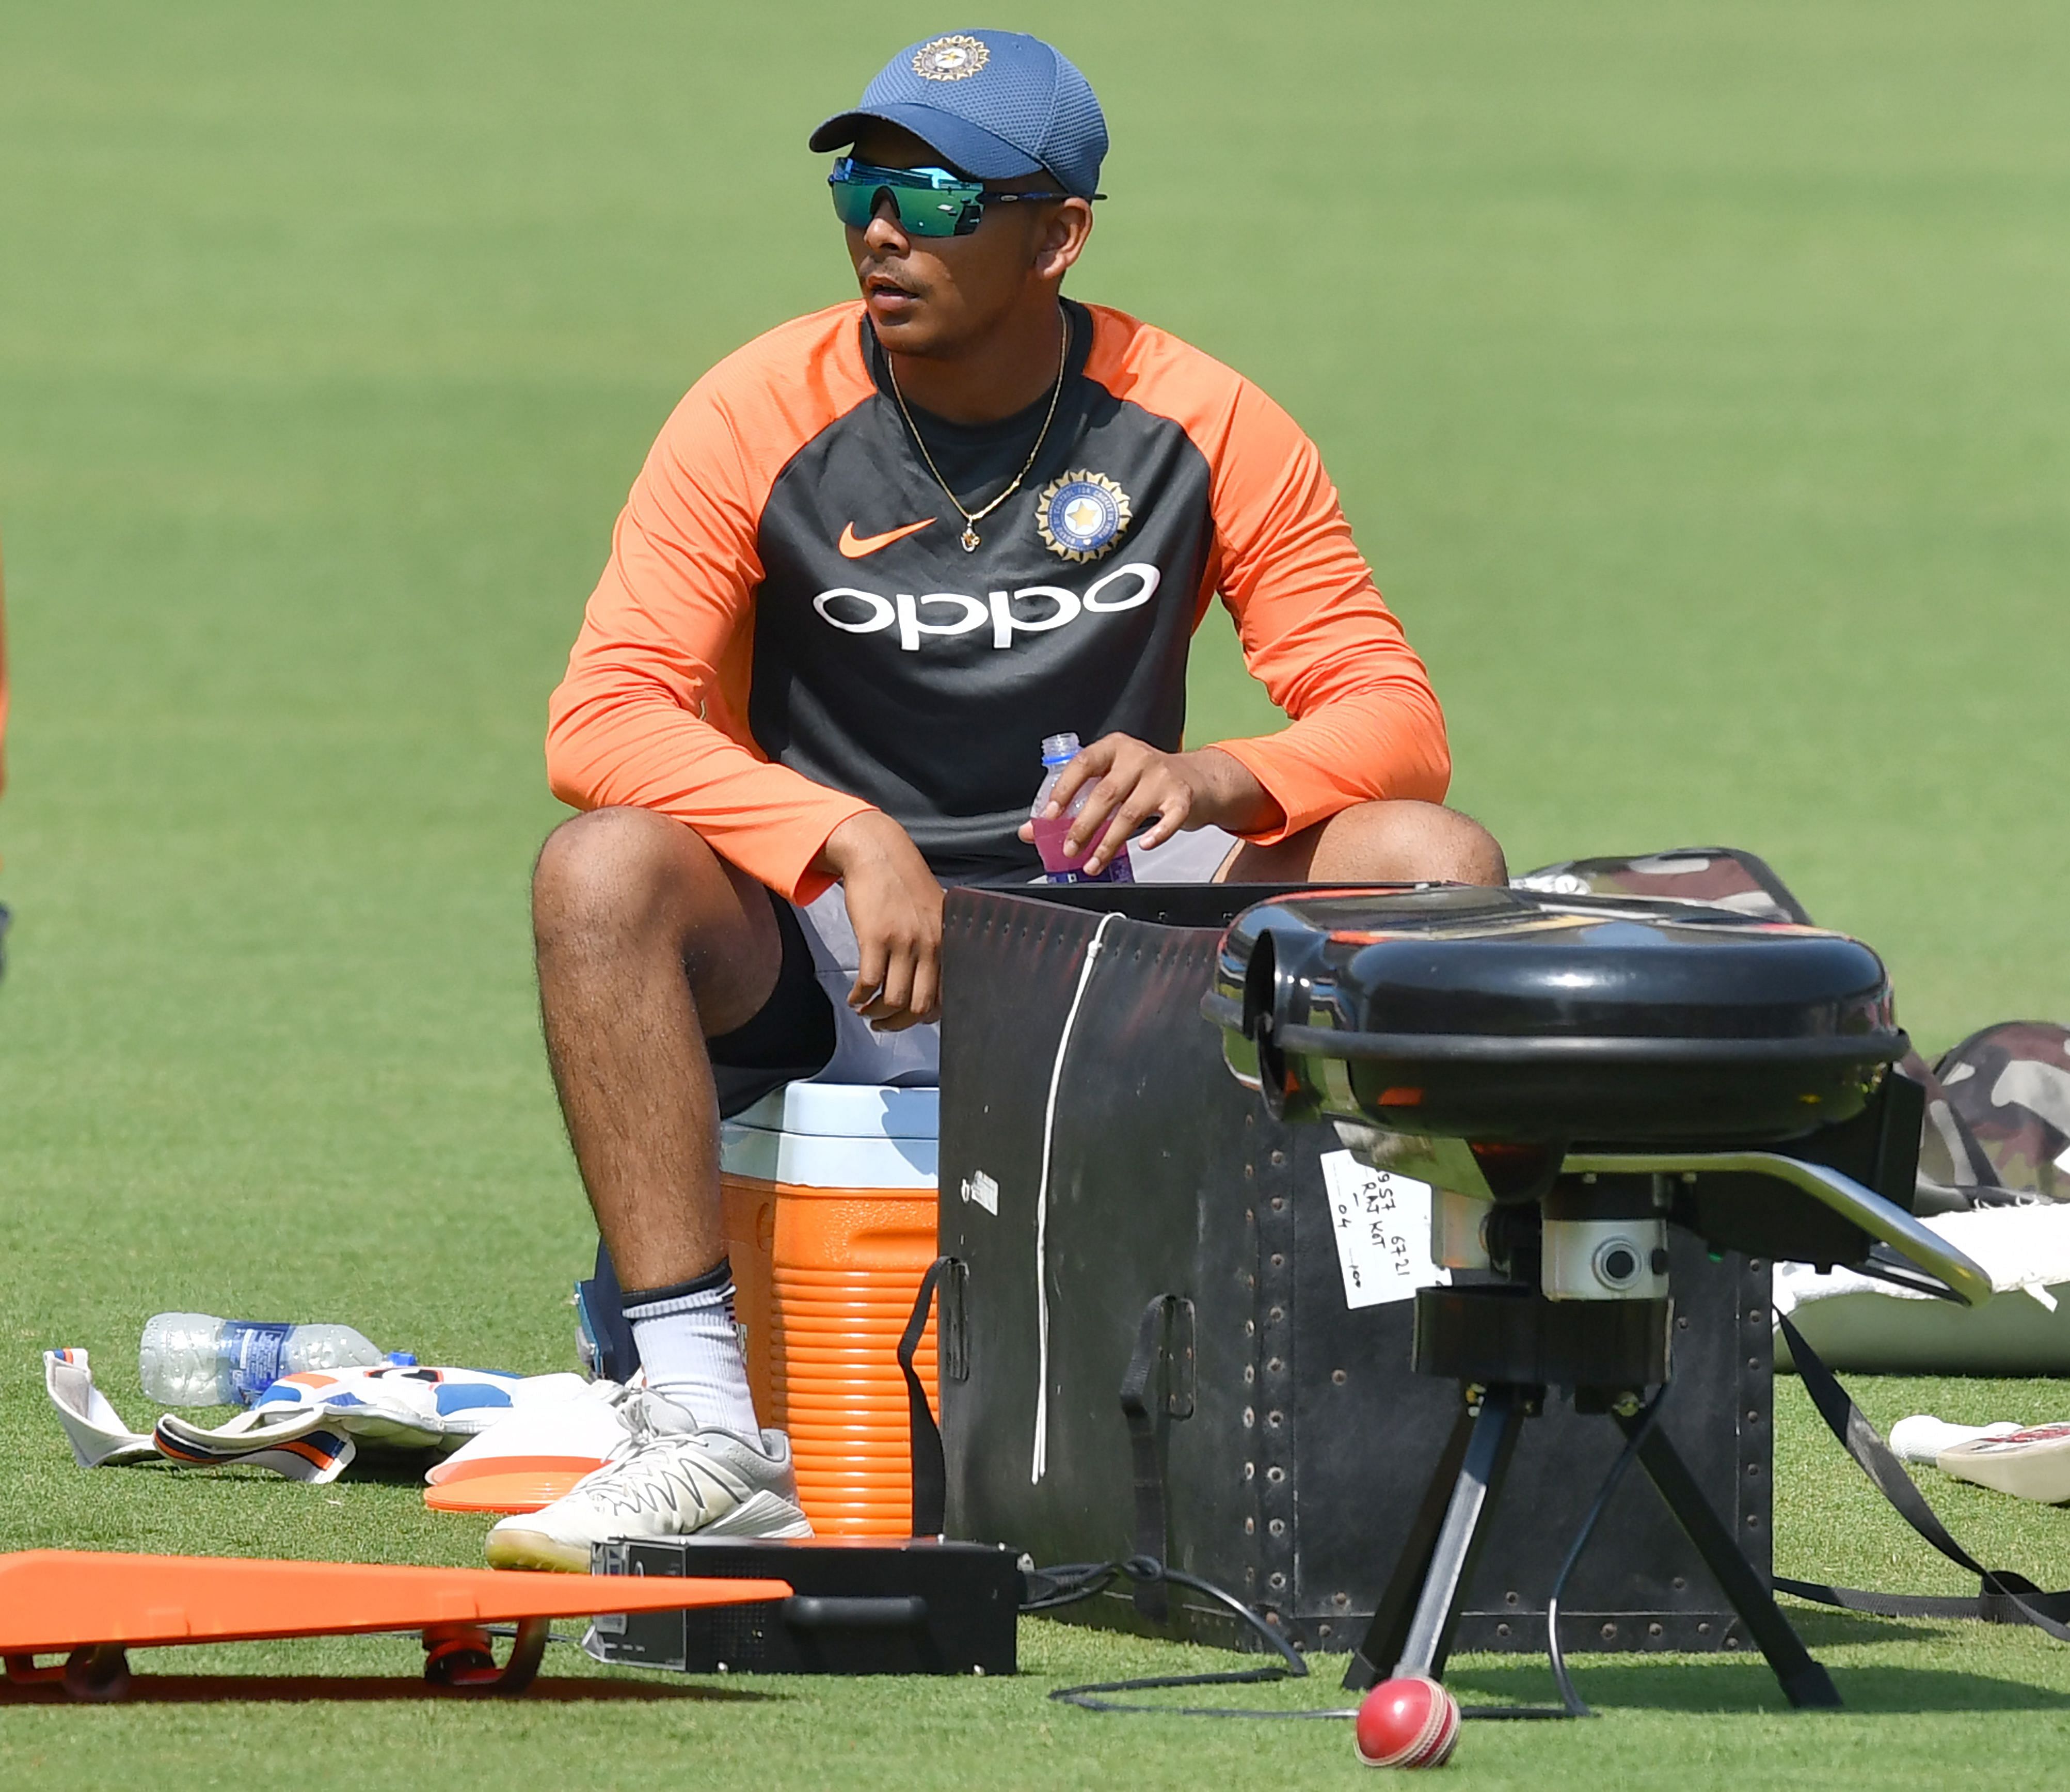 Cricketer Prithvi Shaw looks on during a training session ahead of the first Test match between India and West Indies at the Saurashtra Cricket Association stadium in Rajkot on Wednesday. (AFP)